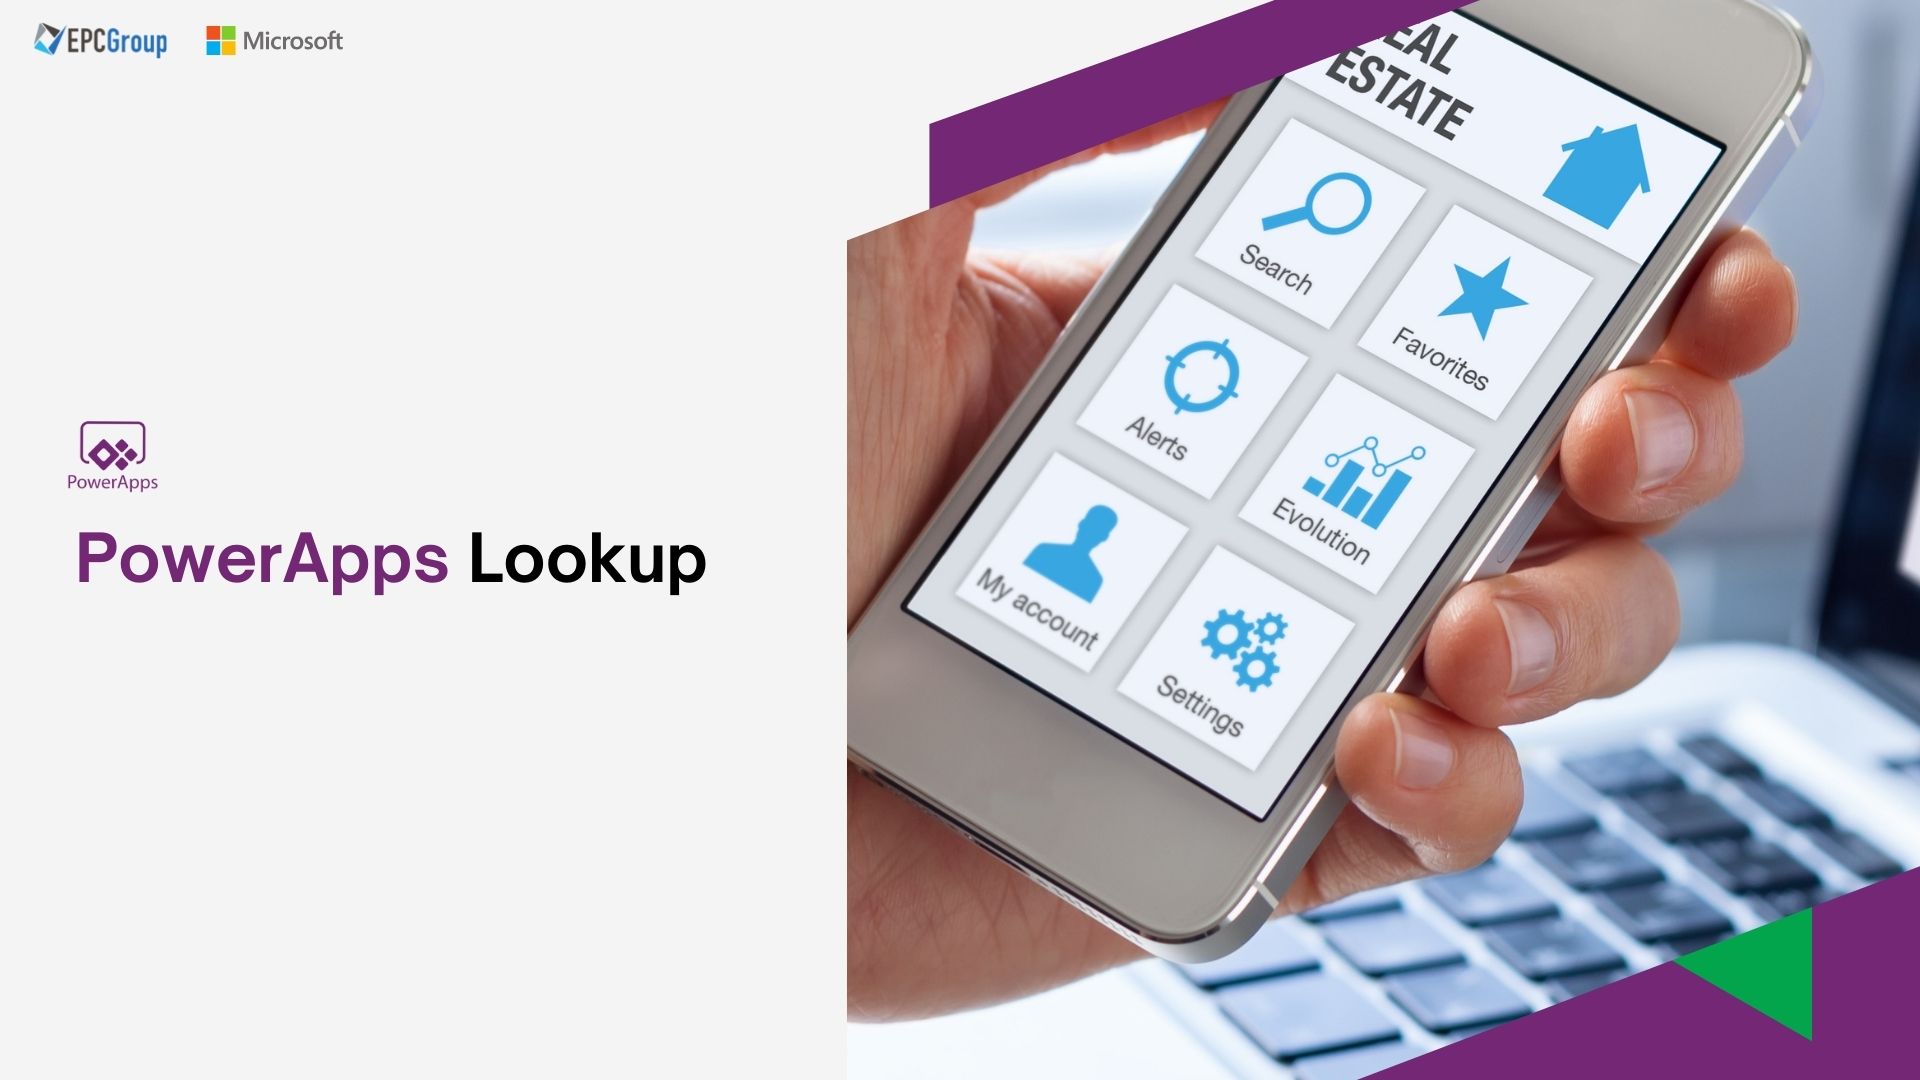 What Are PowerApps Lookup And Its Use Cases